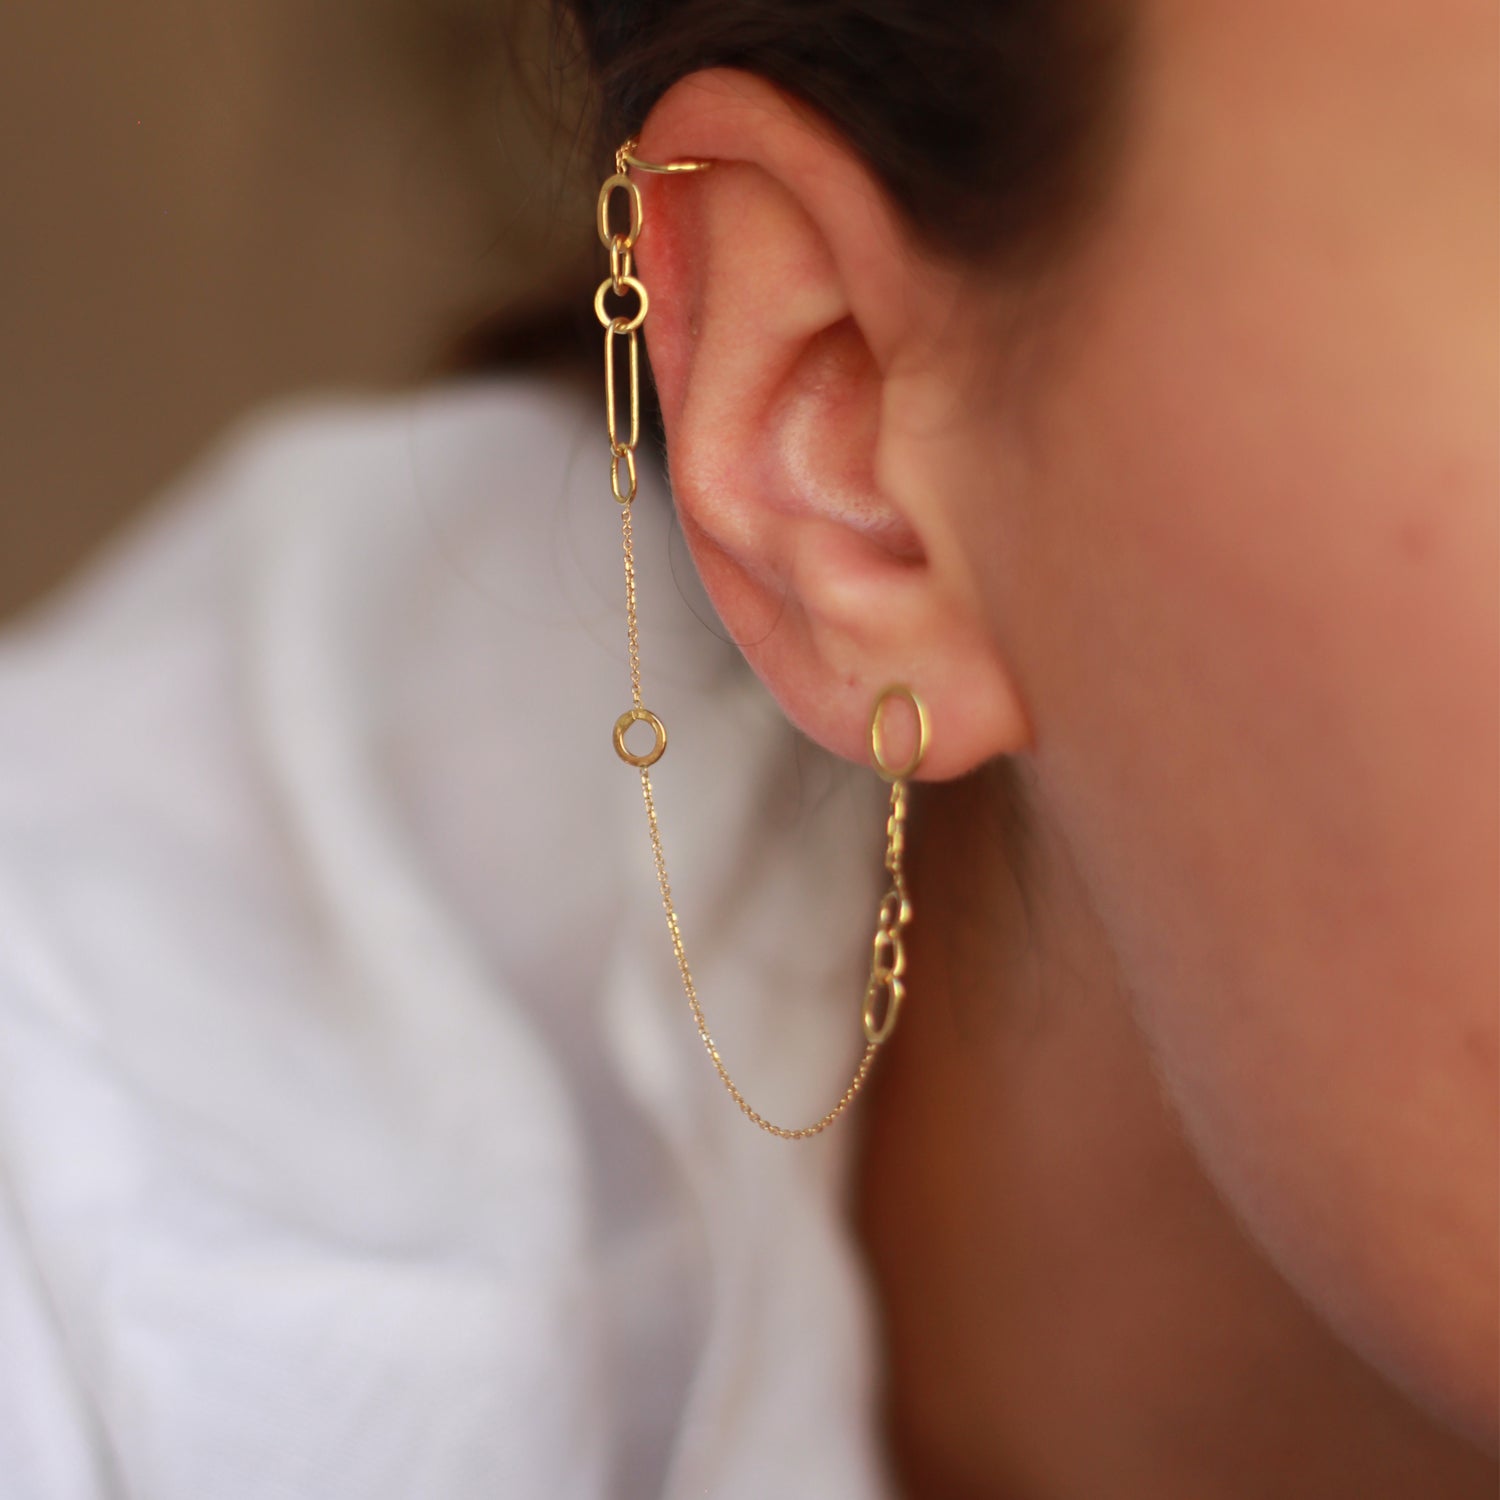 Linked with Love Stud To Cuff Earring on model